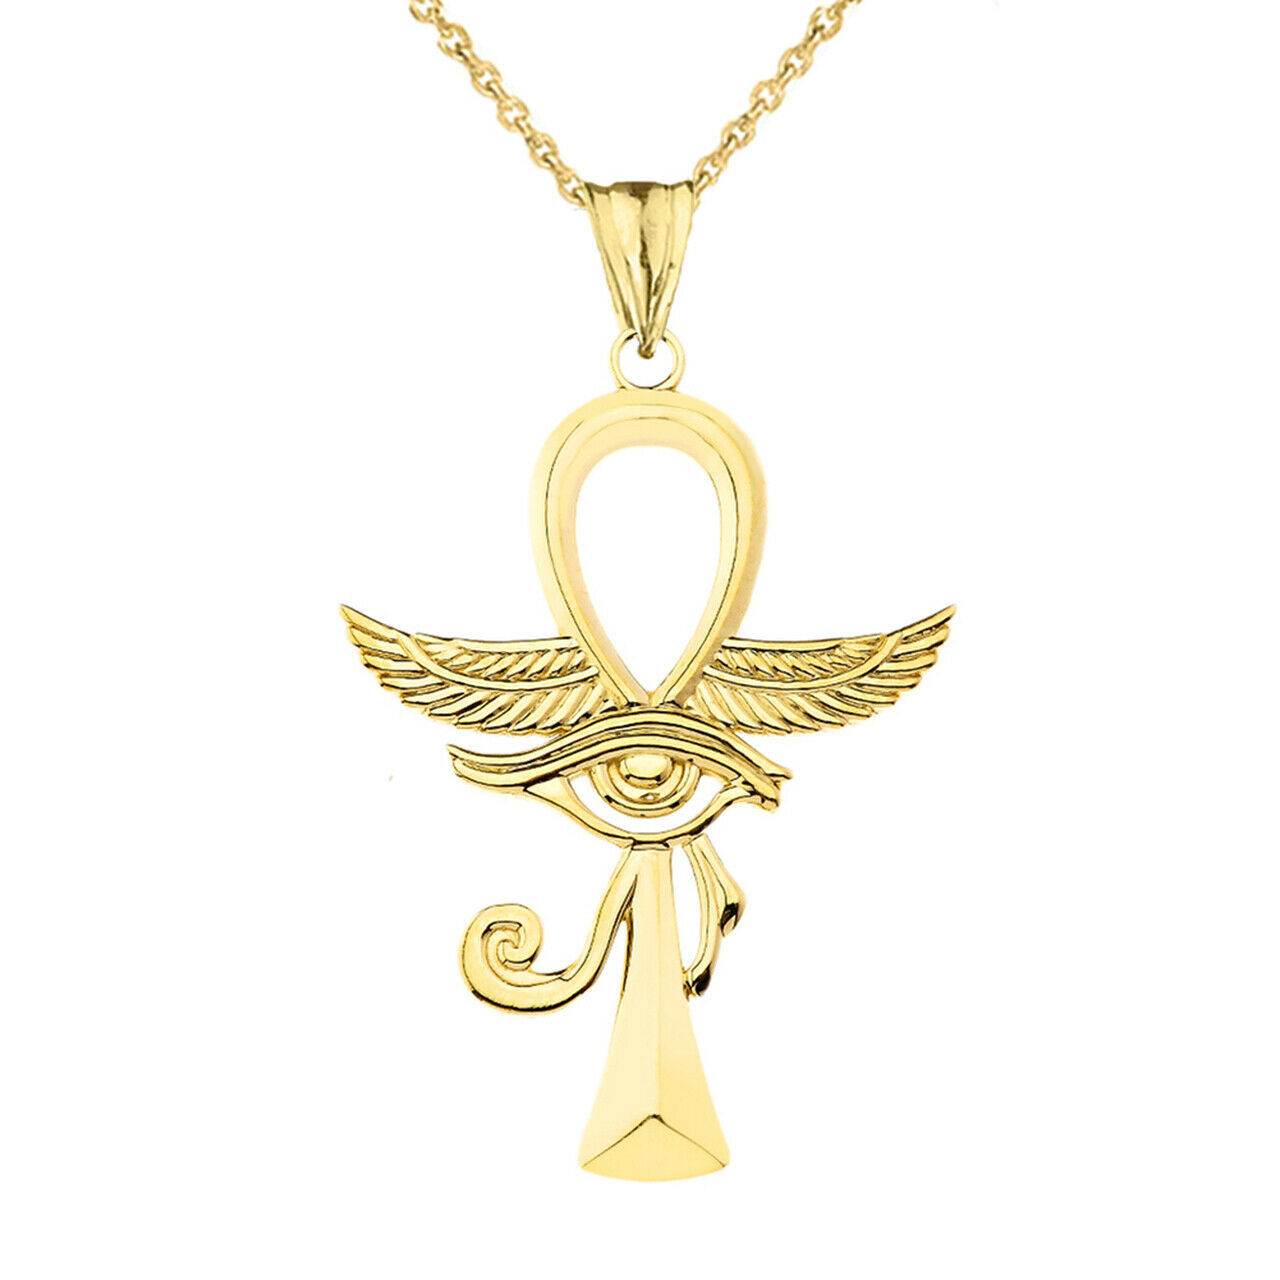 Primary image for 10k Solid Yellow Gold Ankh With Eye of Horus Pendant Necklace